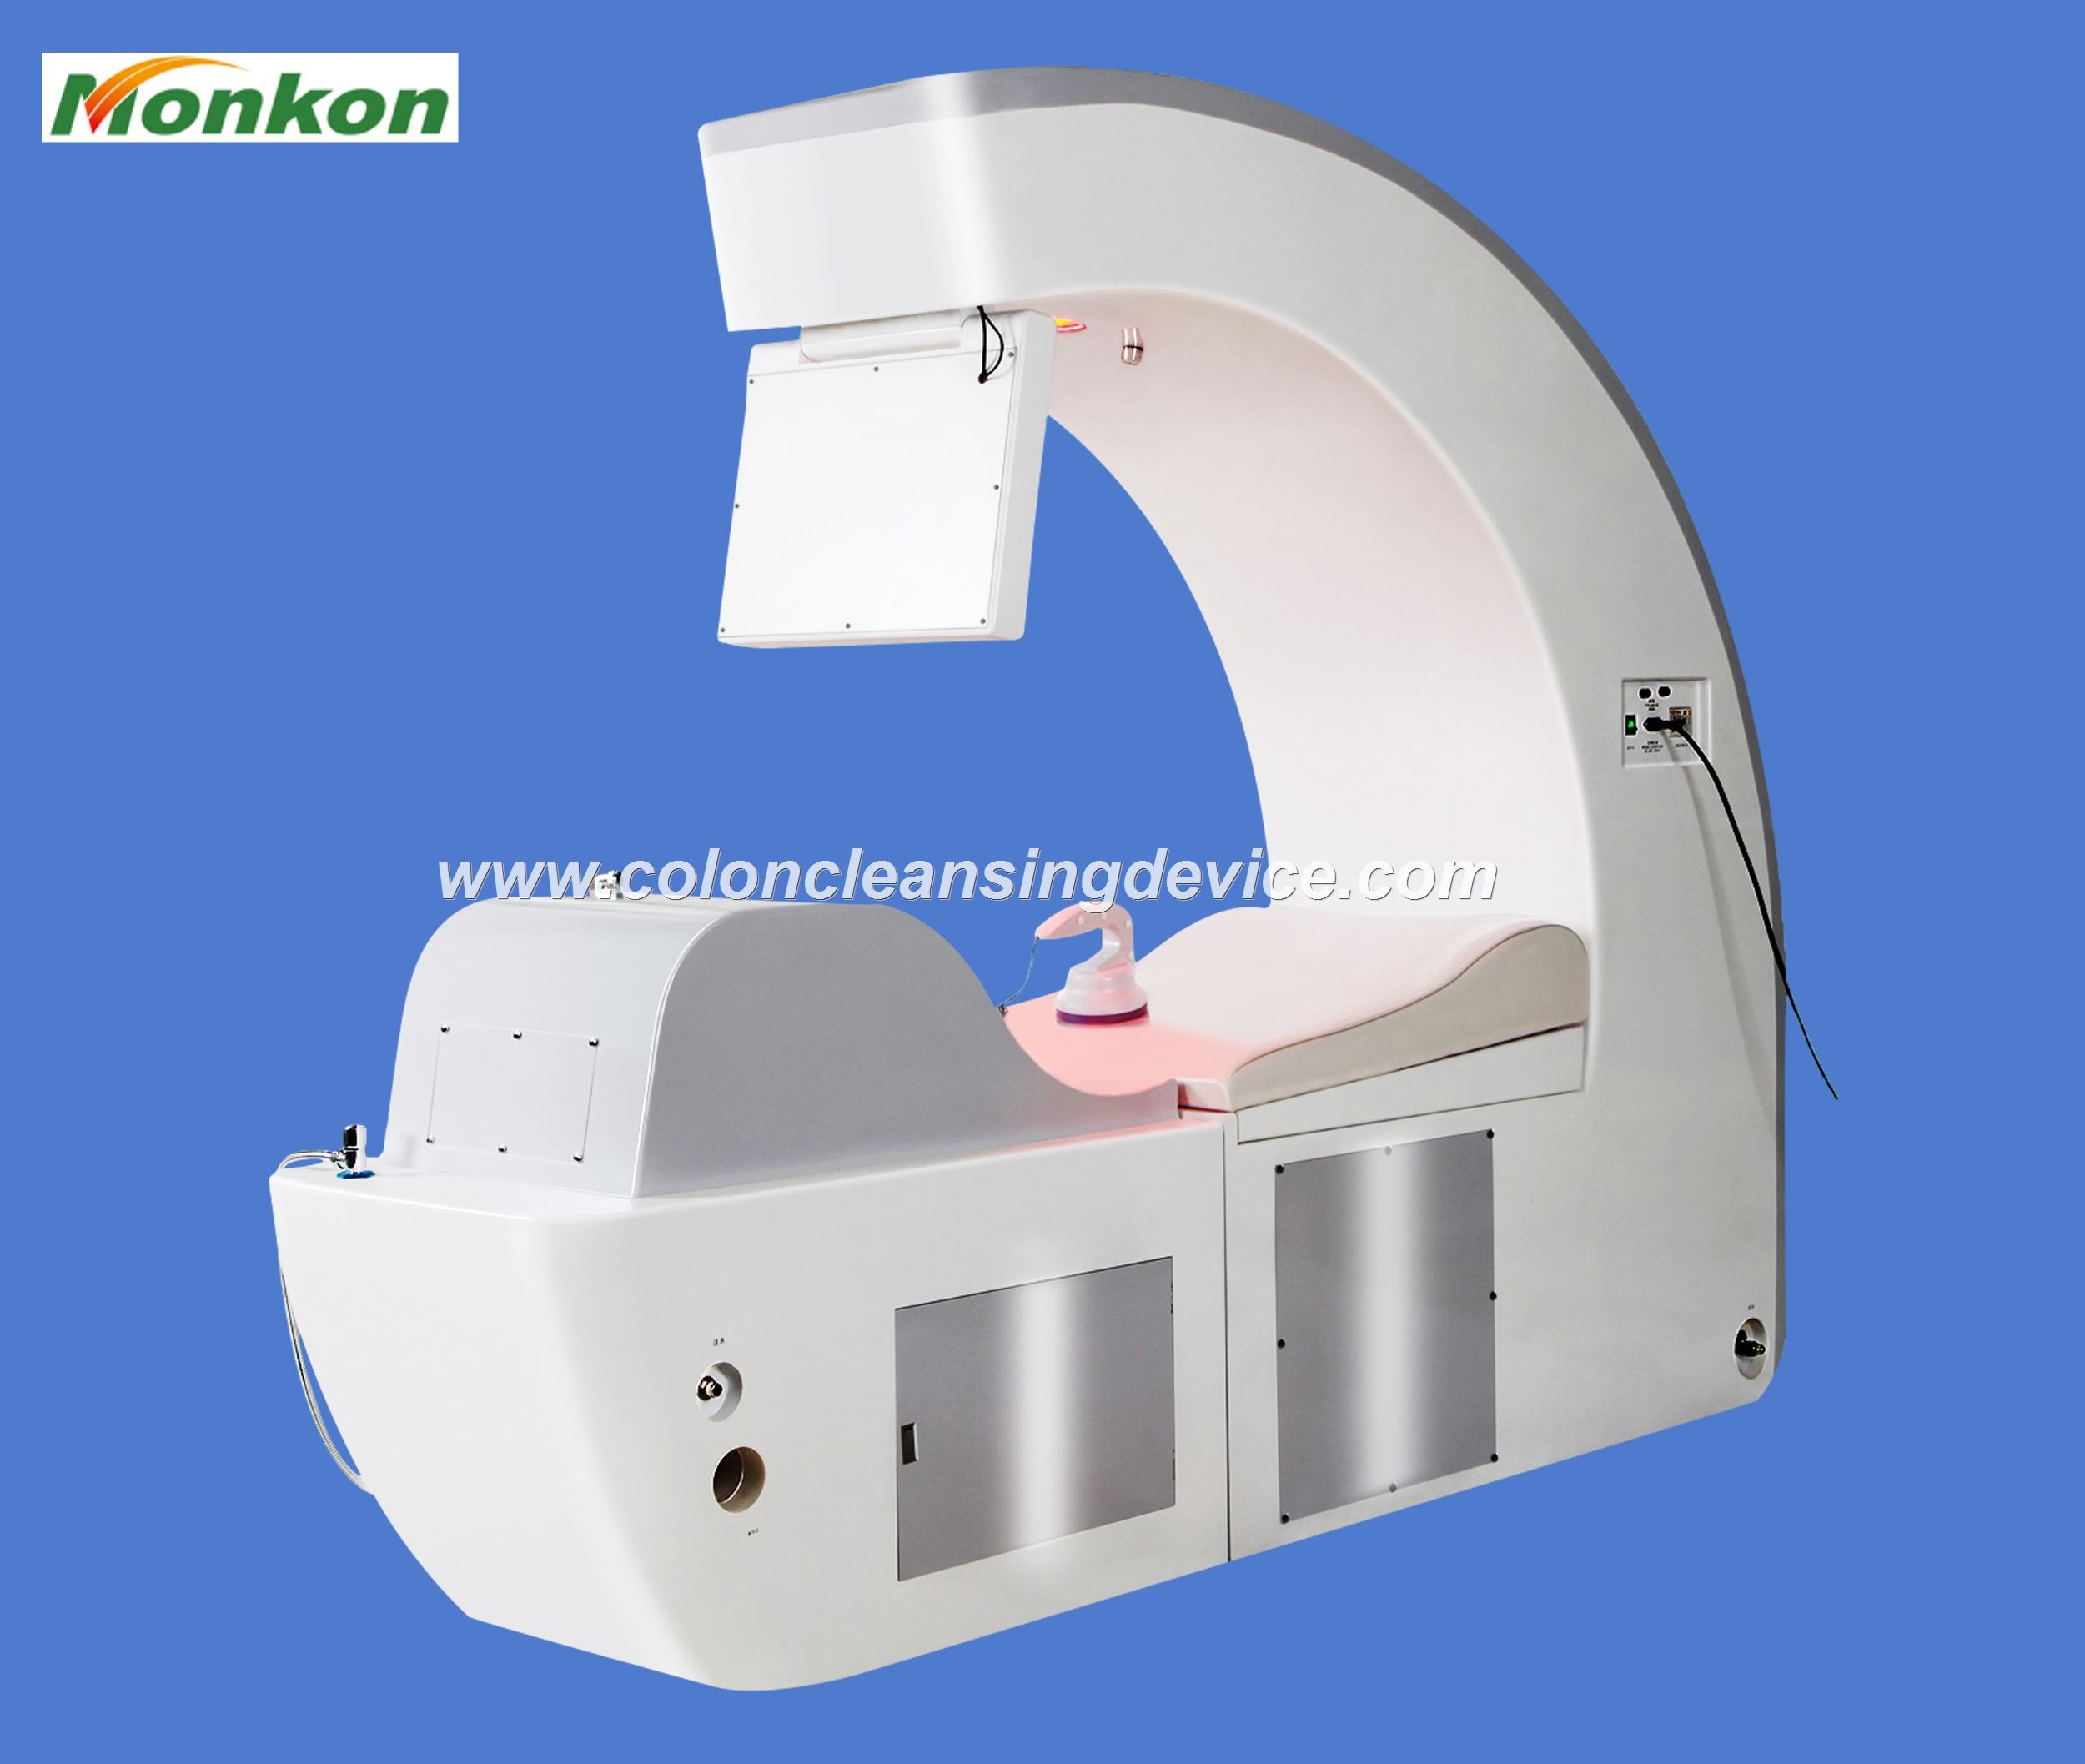 Benefits and Application of Colonic Machine